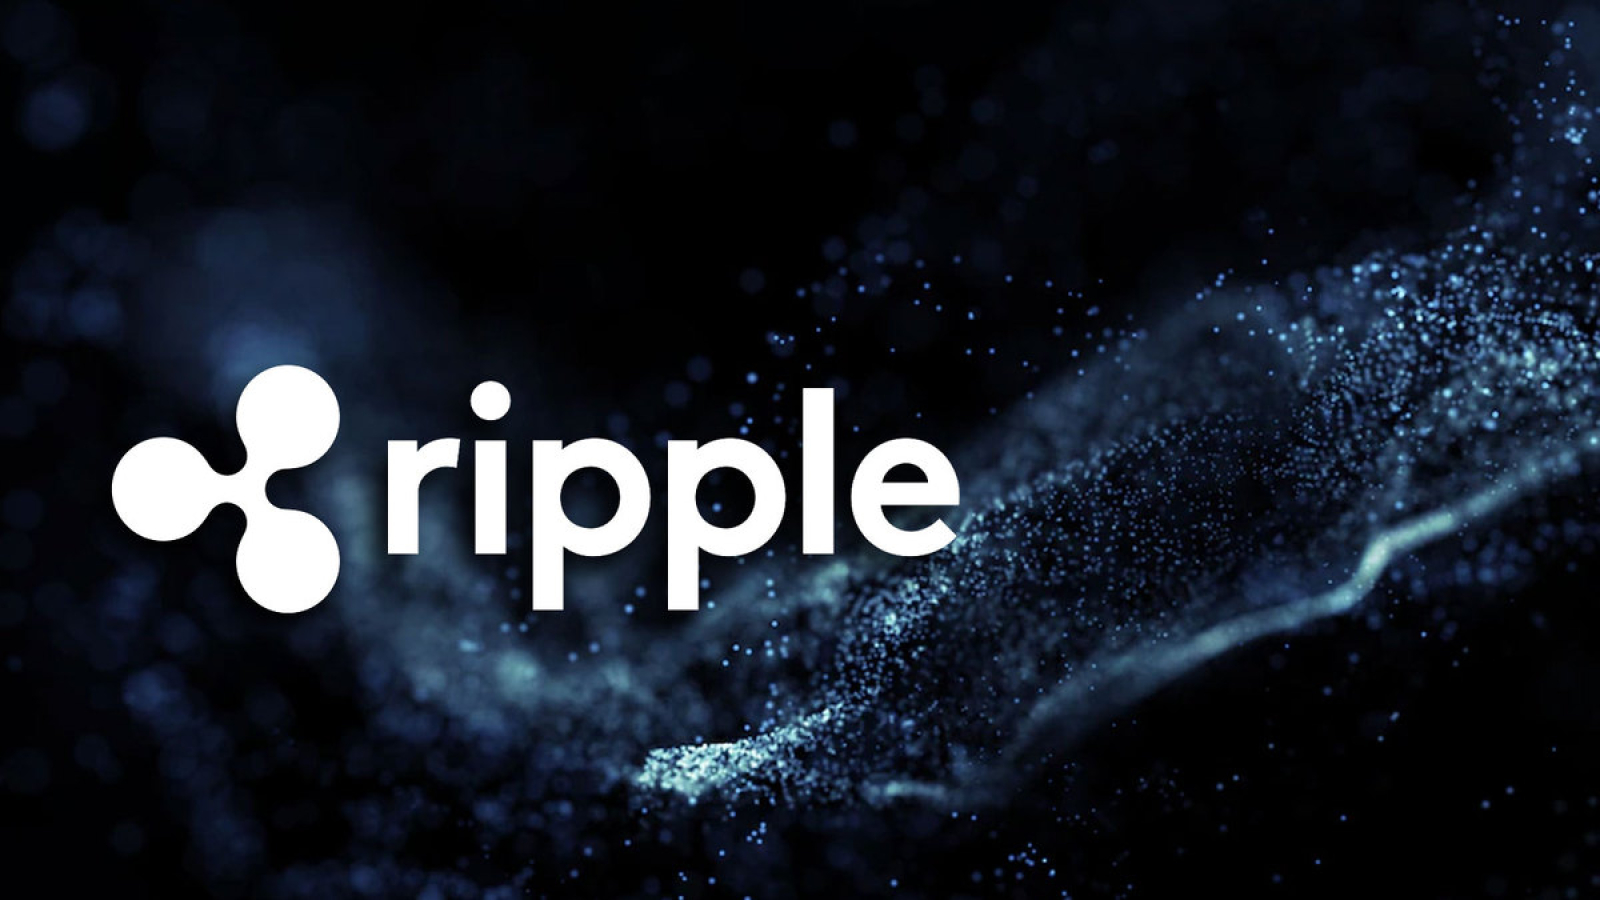 7 Facts You Might Not Know About Ripple